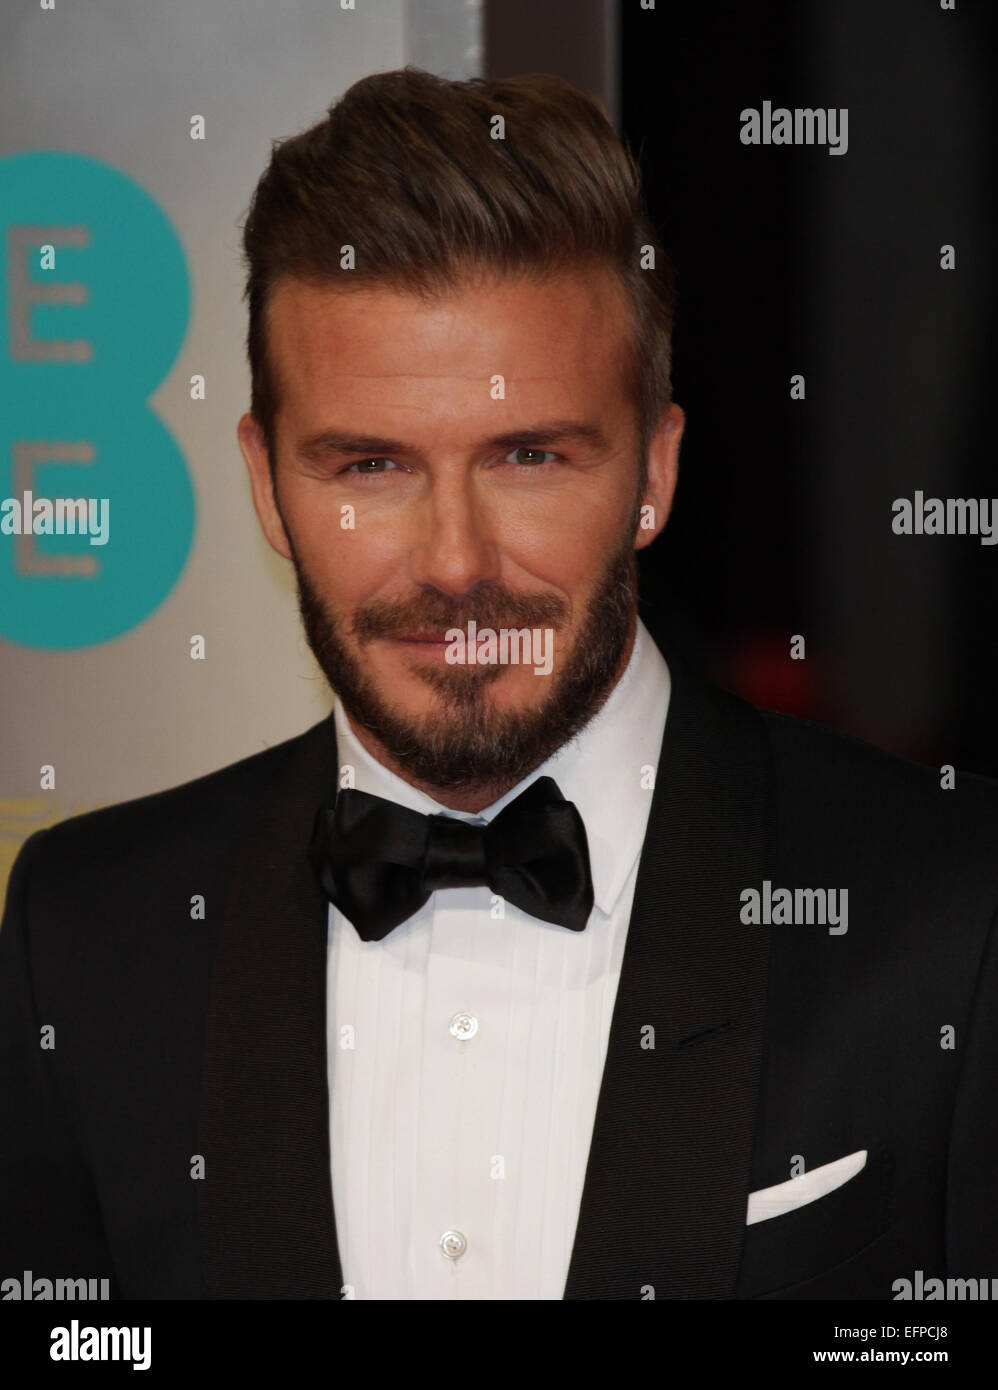 London, UK, 8th February 2015: David Beckham attends the EE British Academy Film Awards at The Royal Opera House  in London Stock Photo